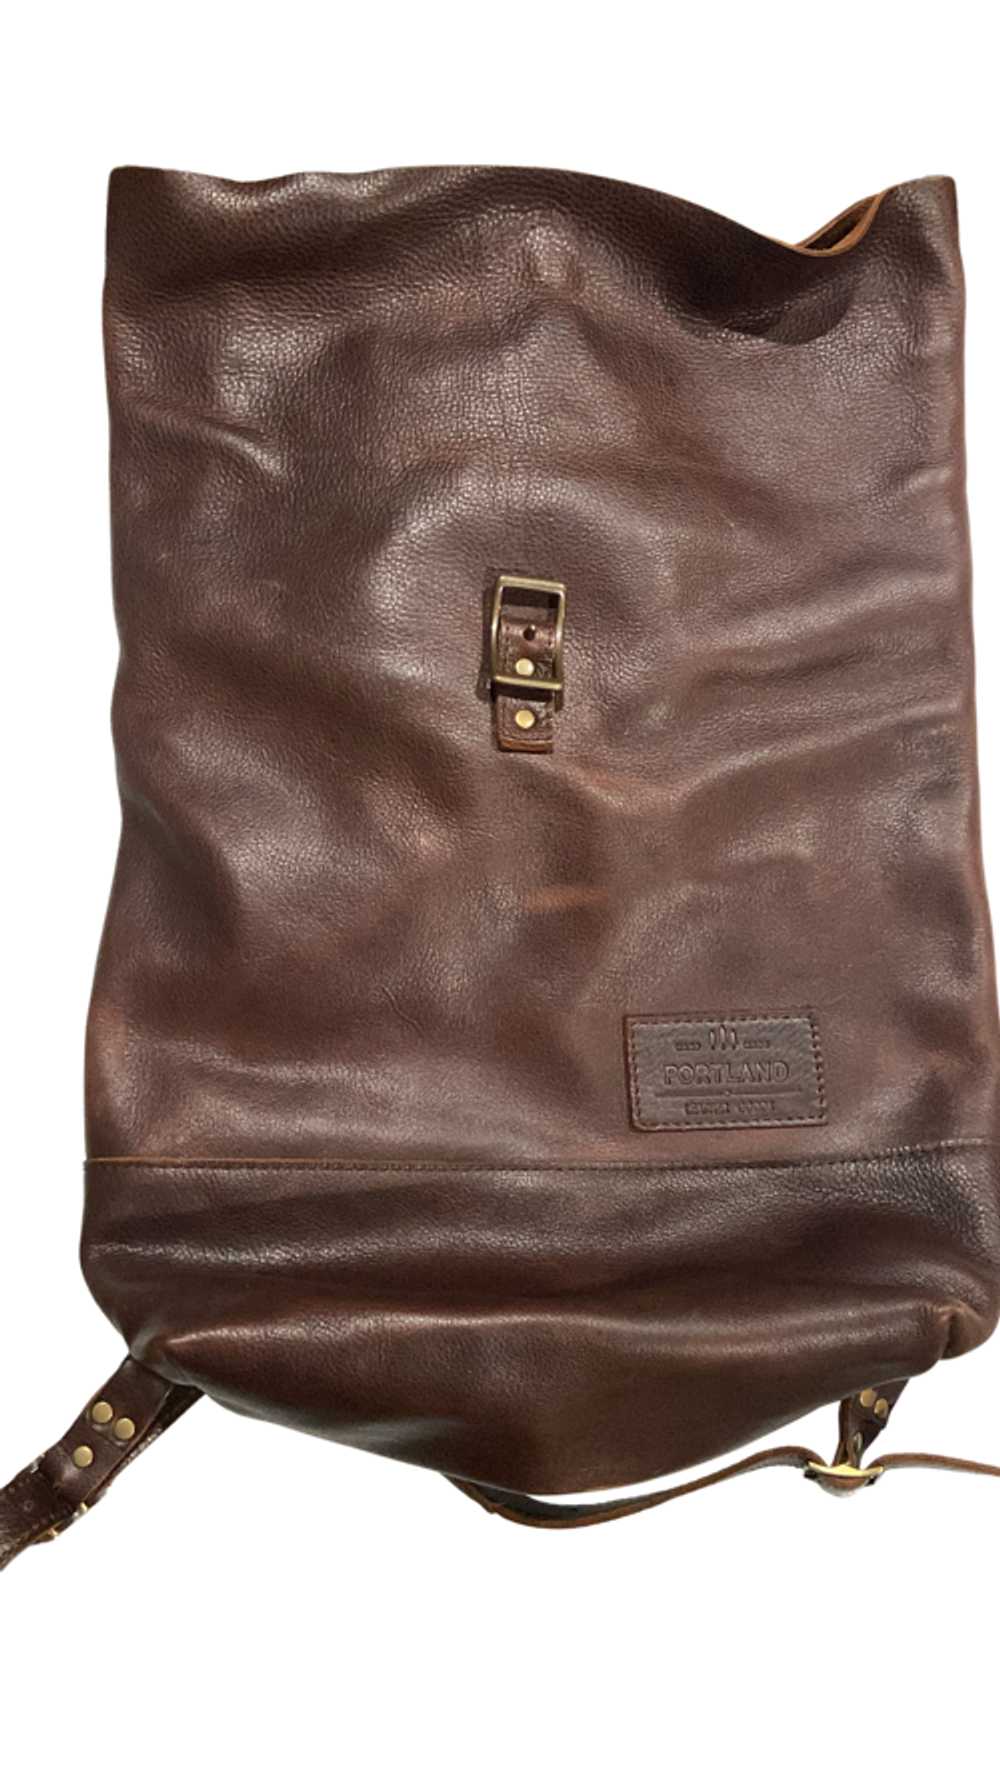 Portland Leather Leather Rolltop Backpack - image 3